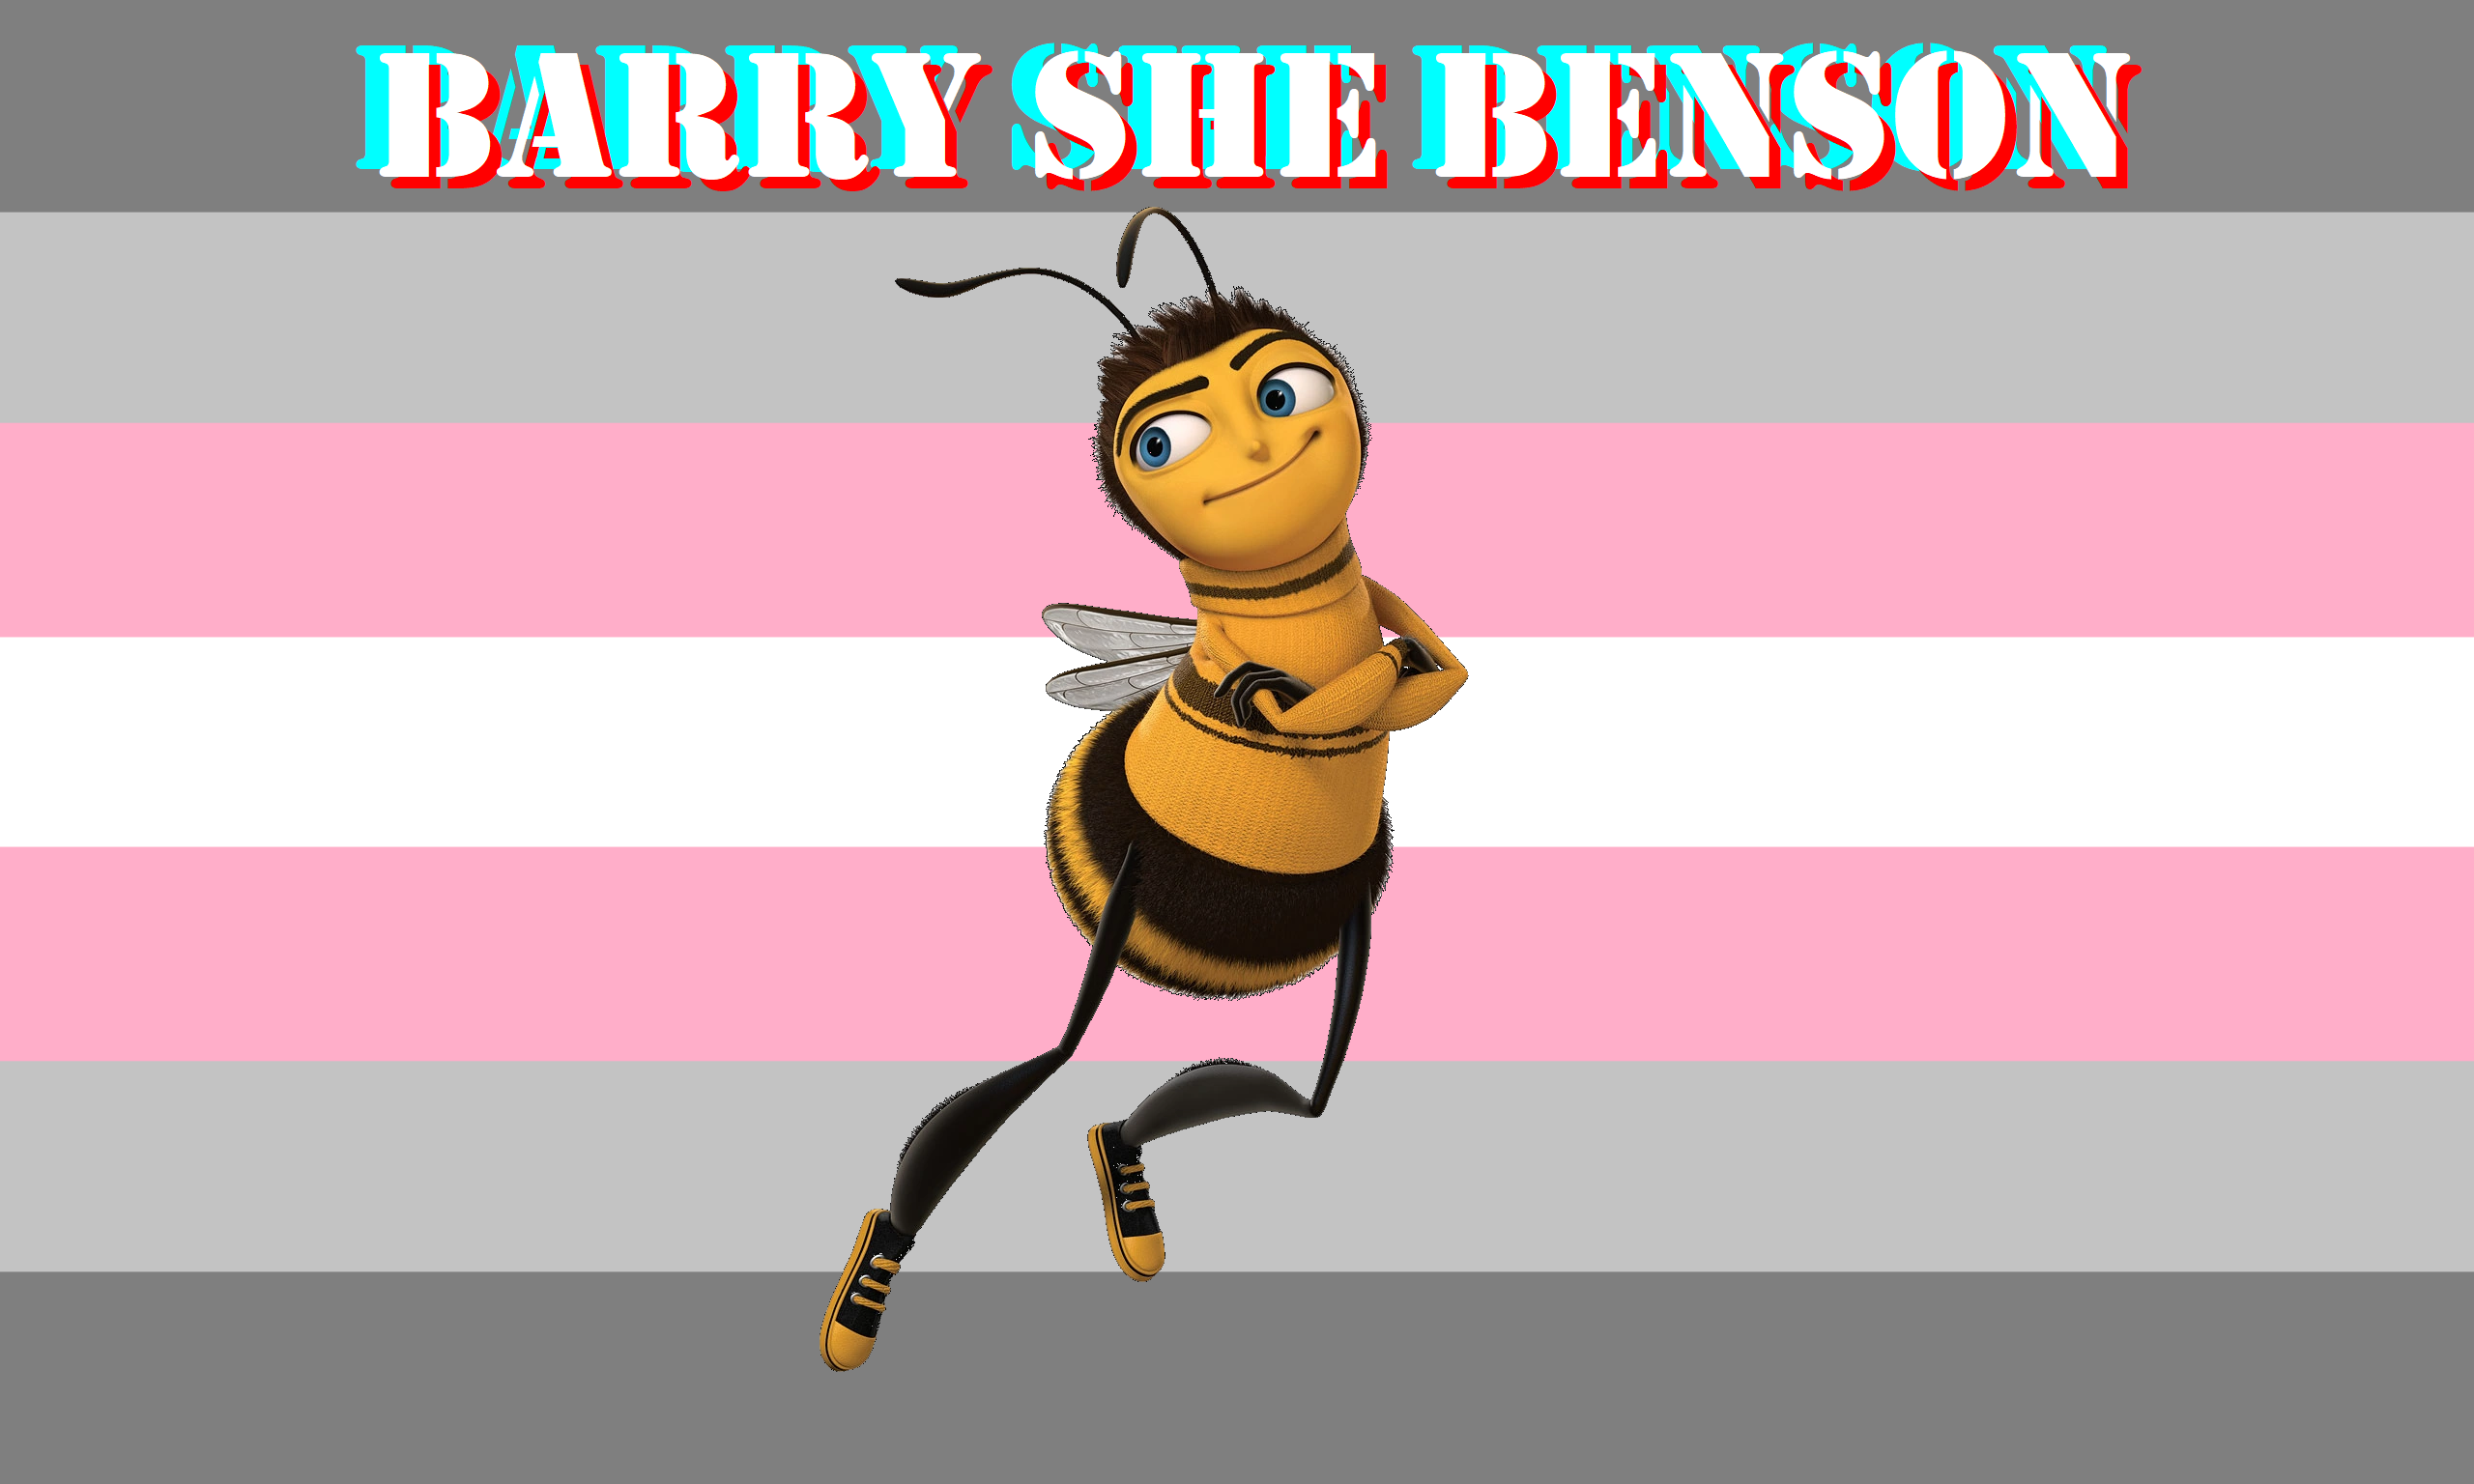 Barry She Benson.png